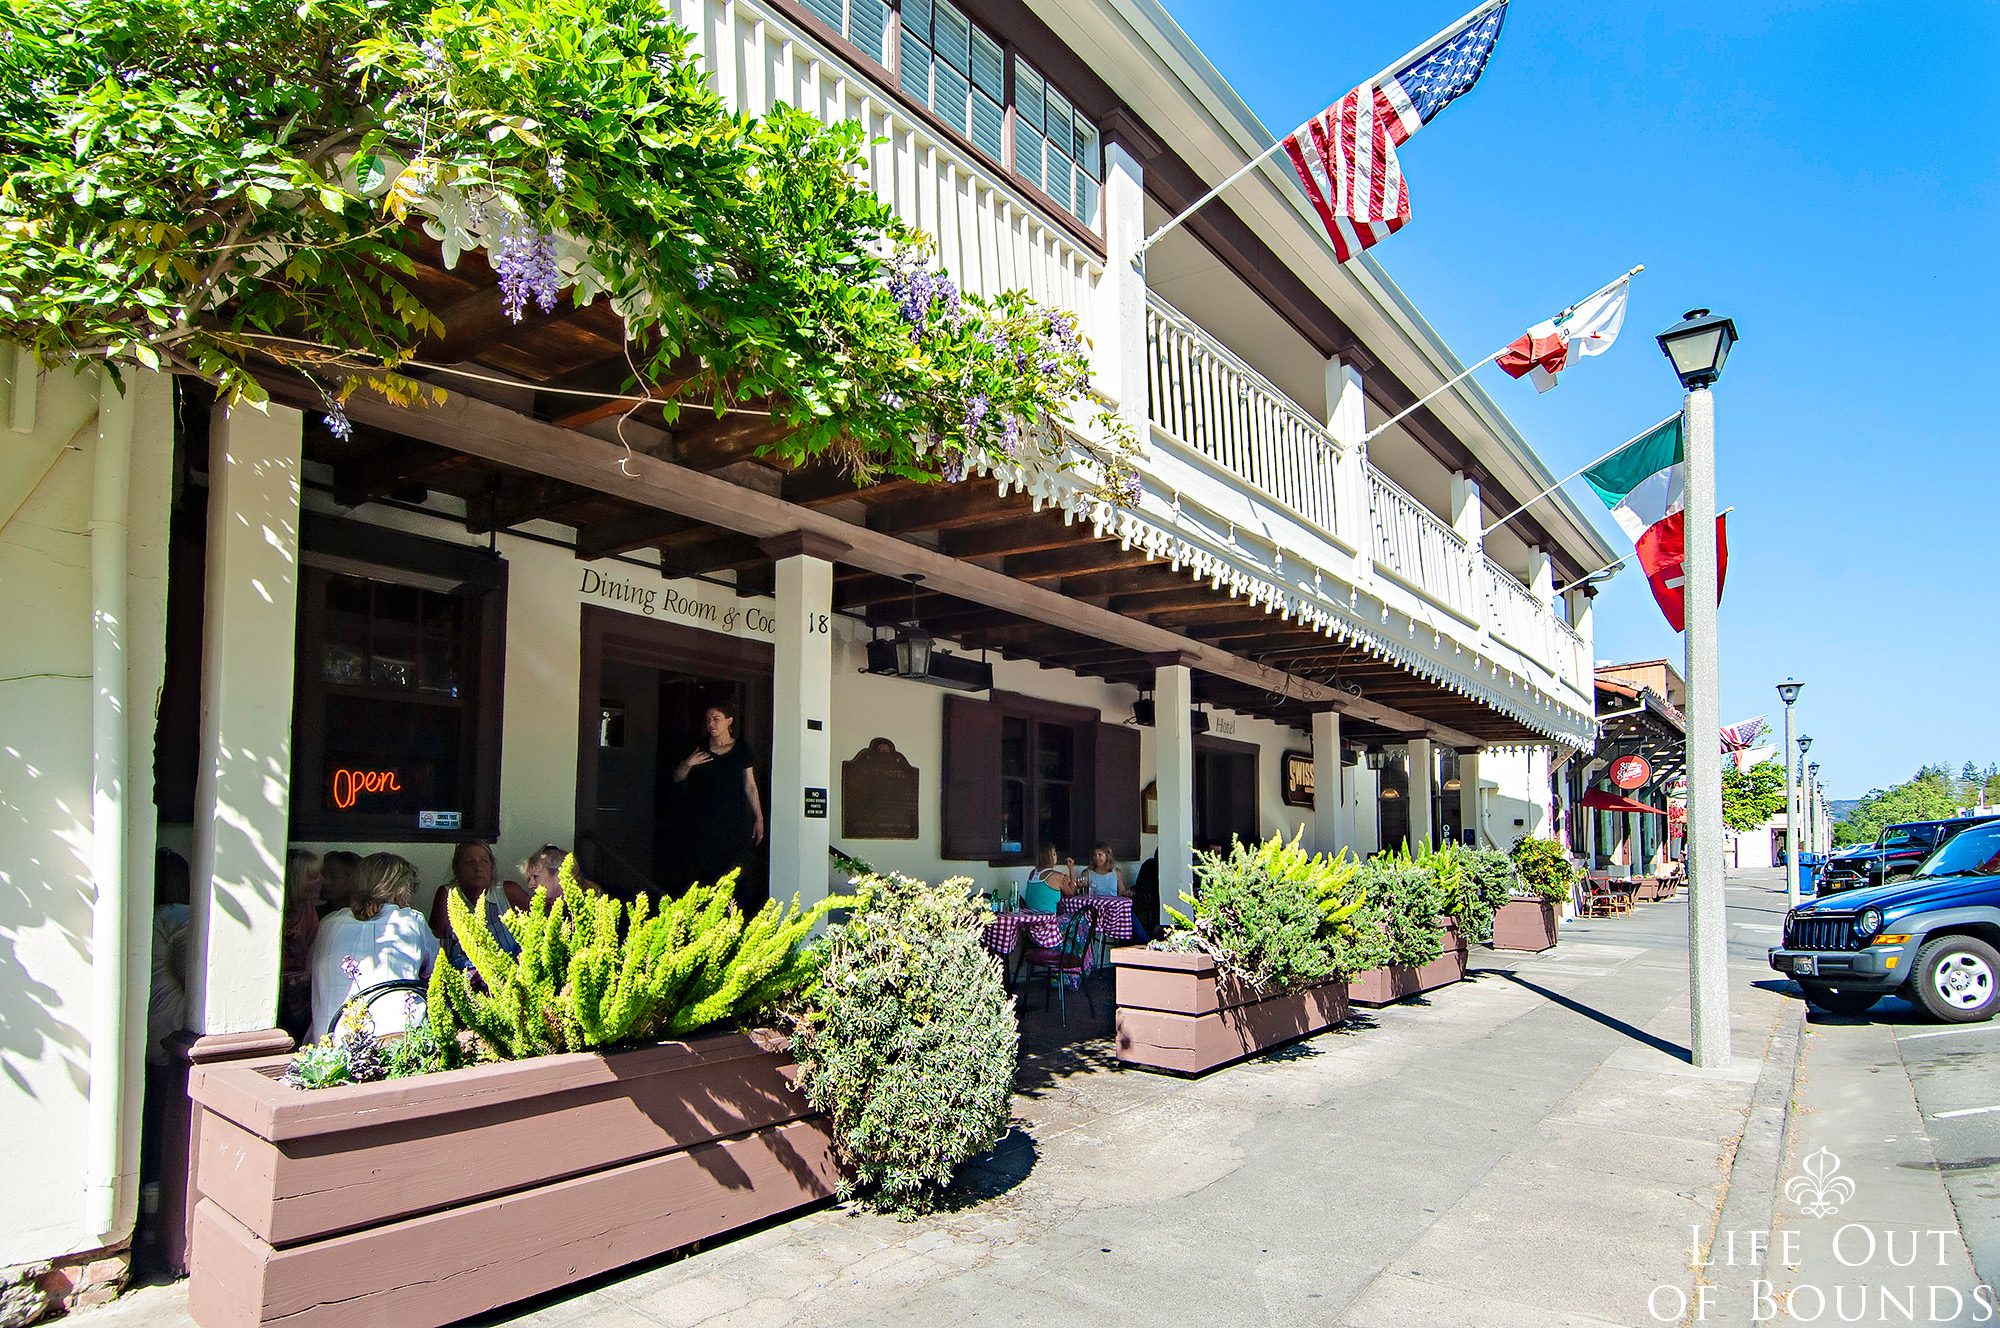 The-Swiss-Hotel-on-the-historic-Plaza-in-Sonoma-California